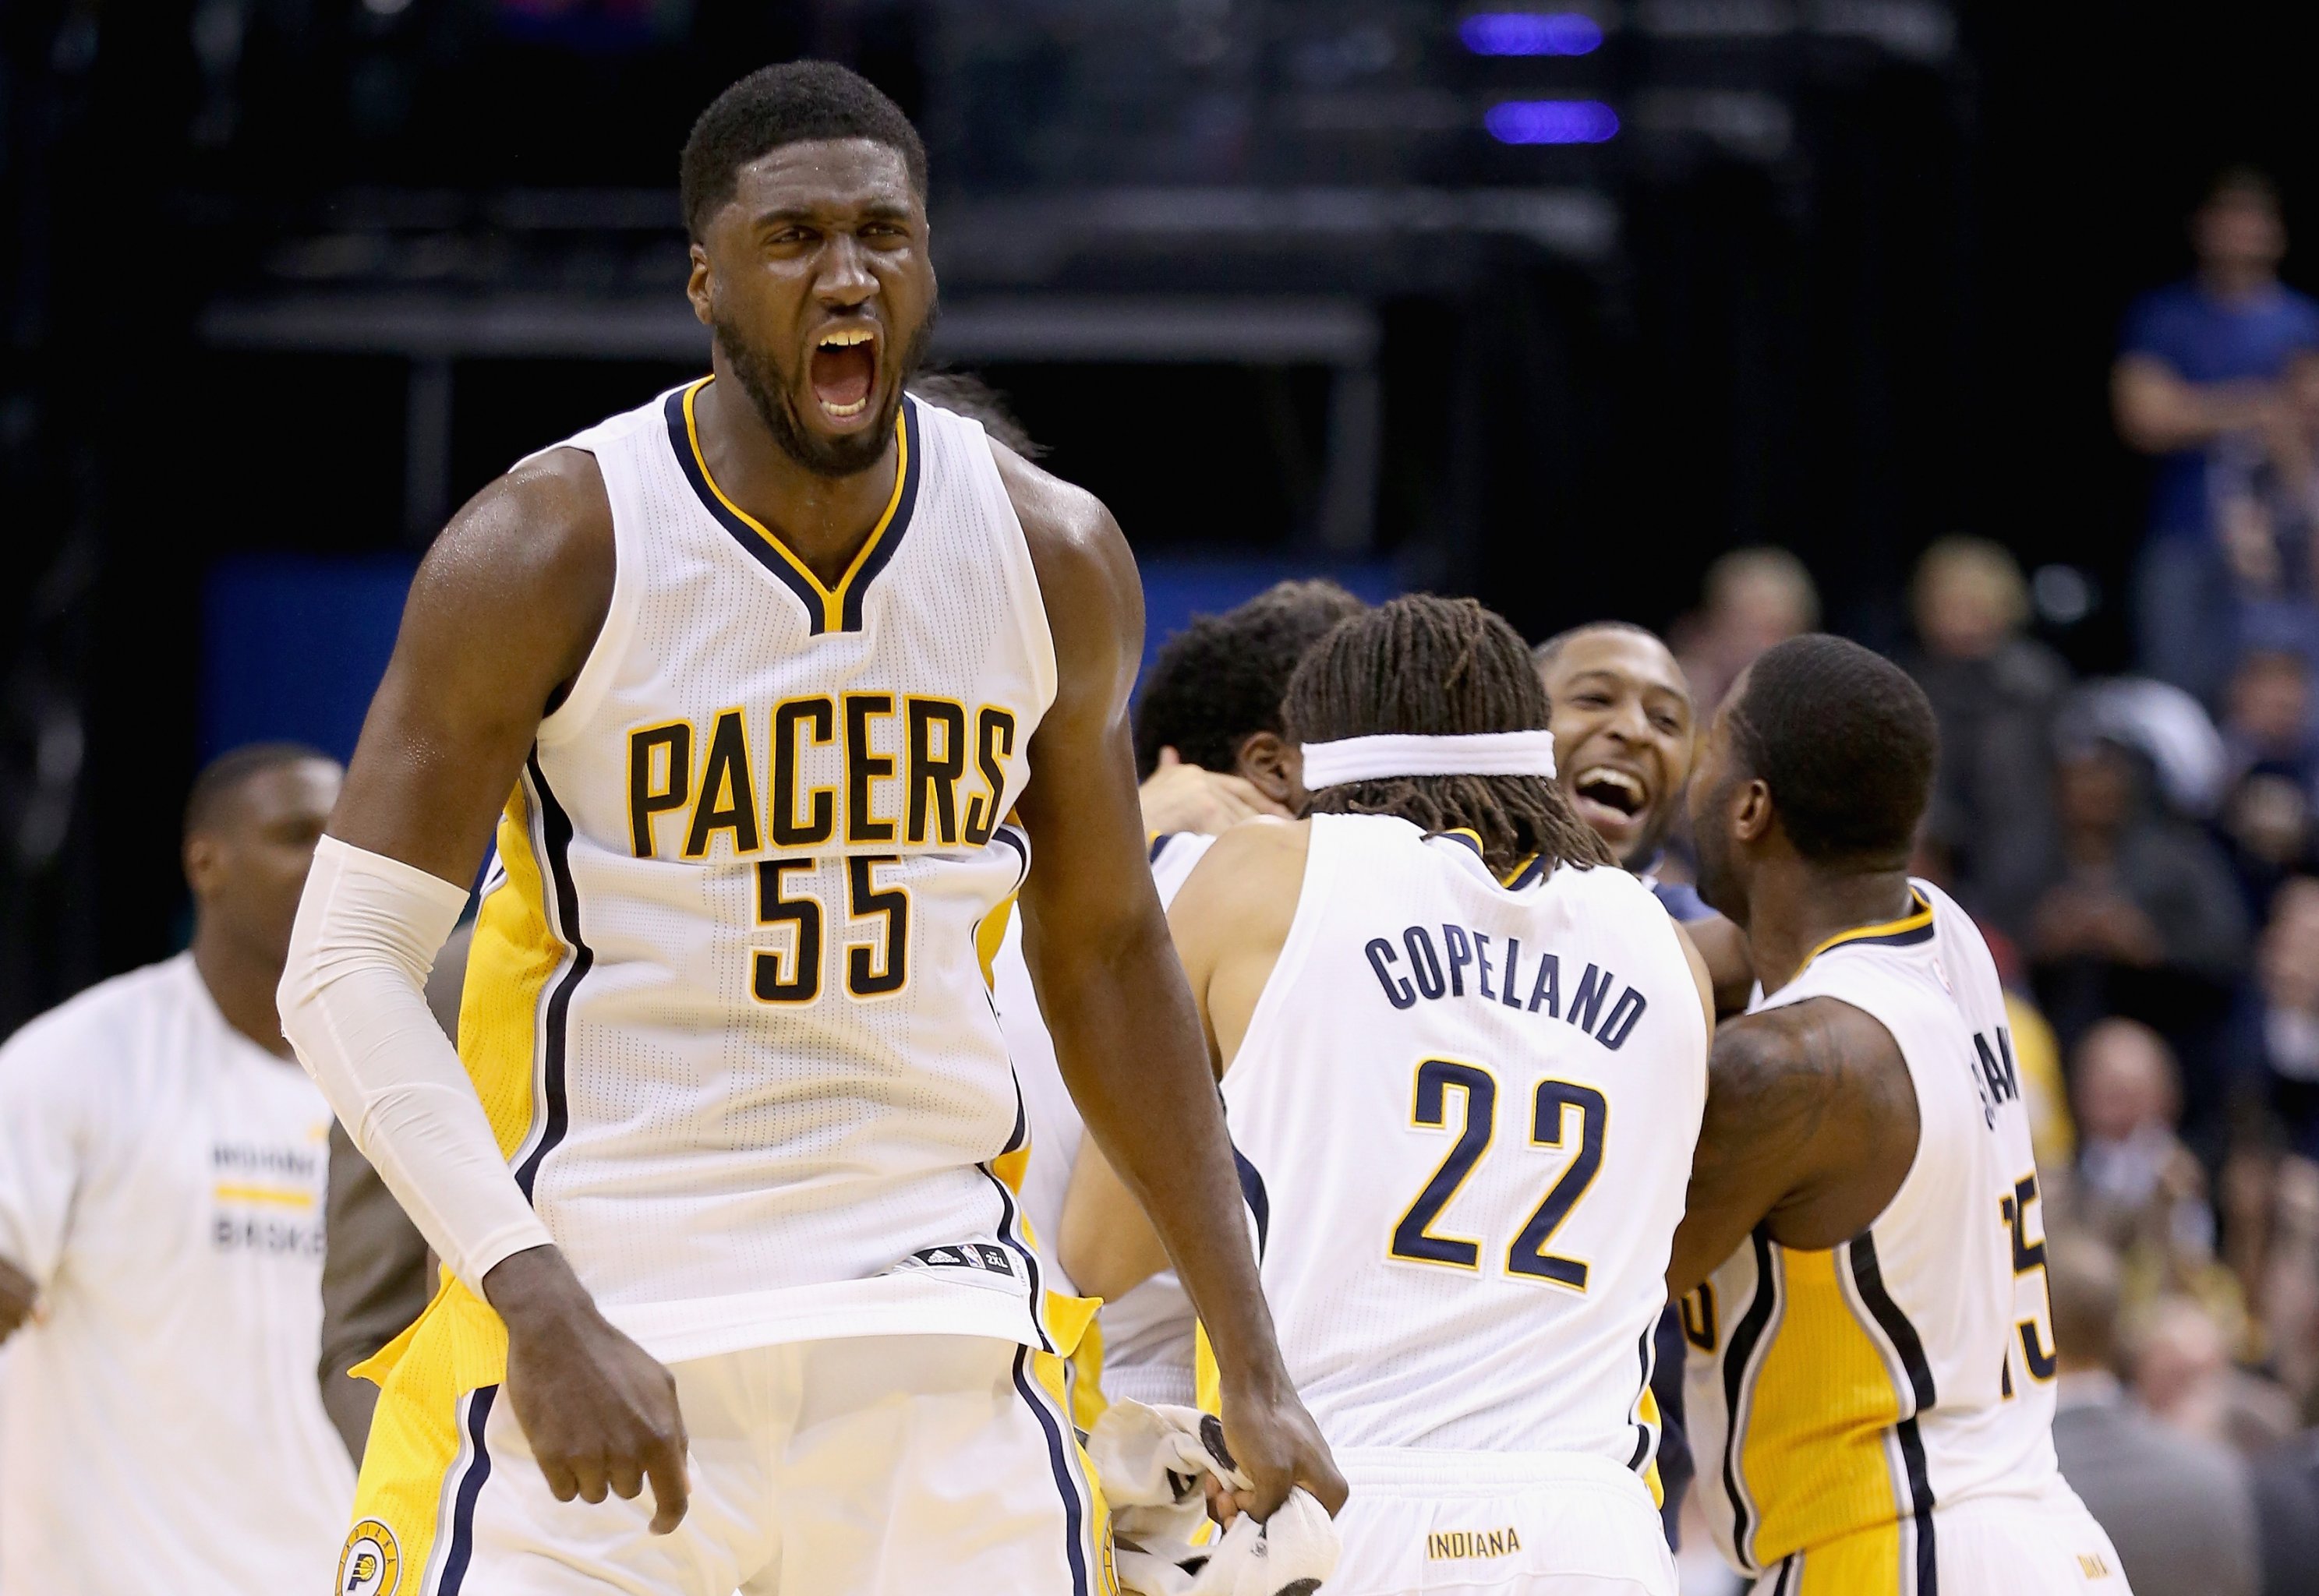 How many numbers have been retired by the Indiana Pacers? - Quora